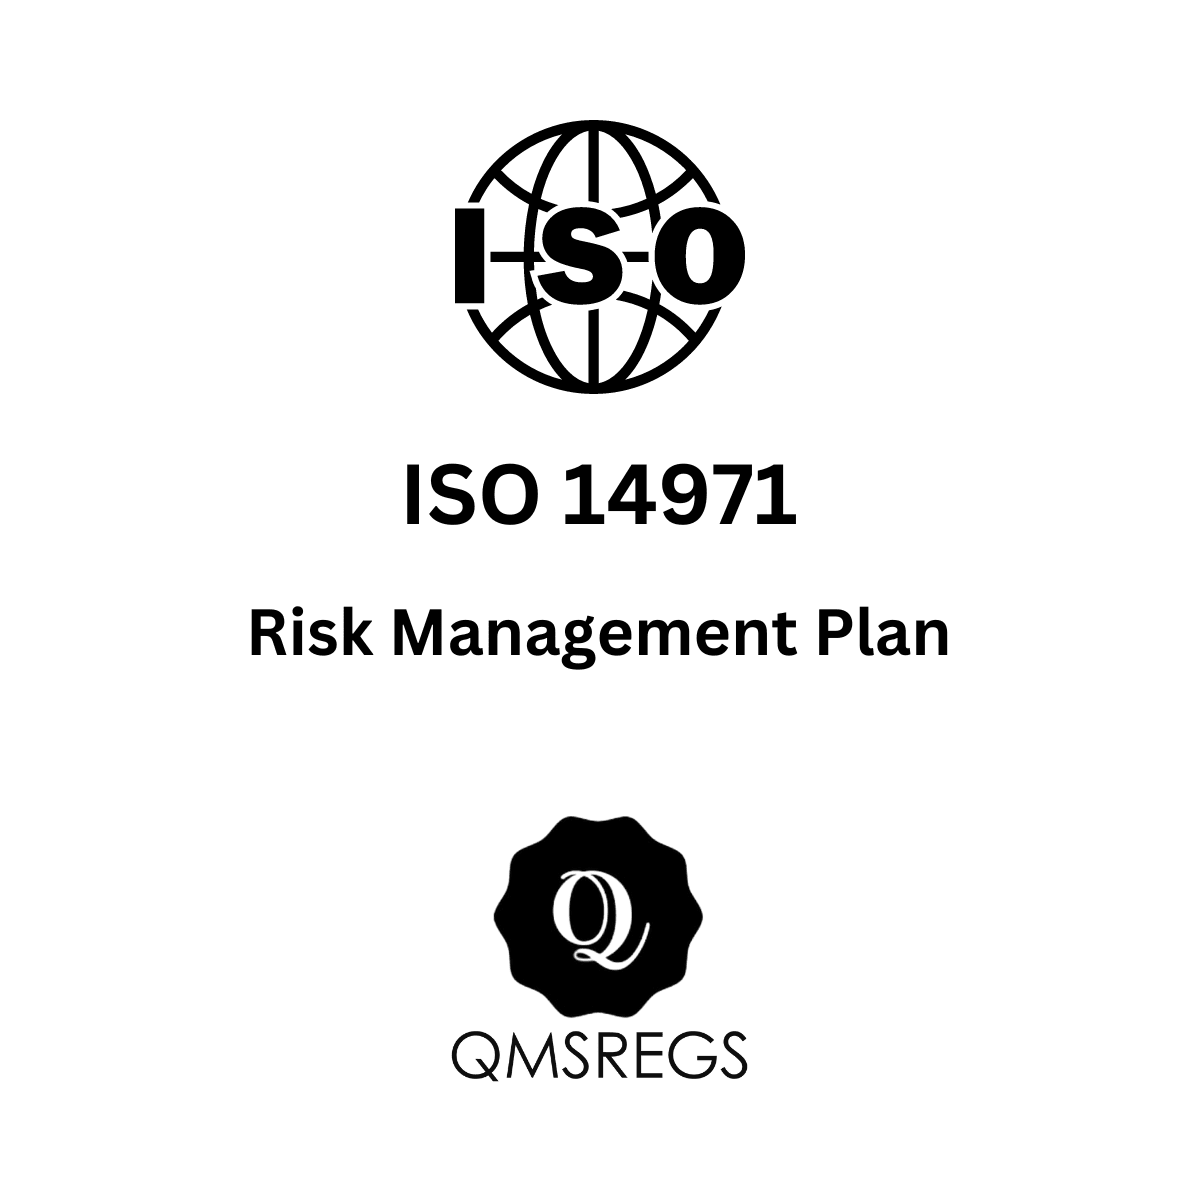 ISO 14971 Risk Management Plan Template